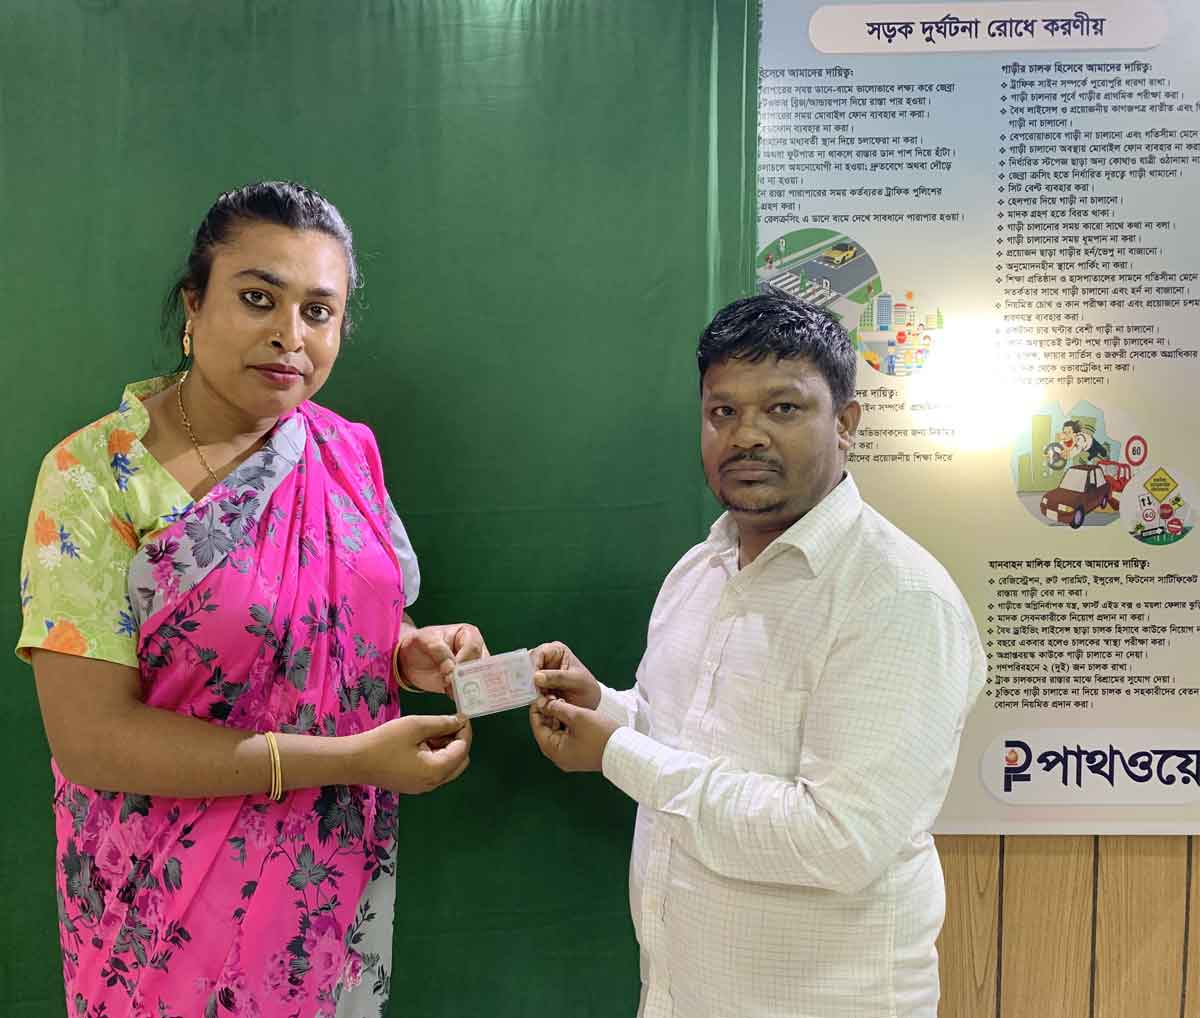 Third gender-Bulbuli Hijra receives the Driving license from Md Shahin executive director pathway